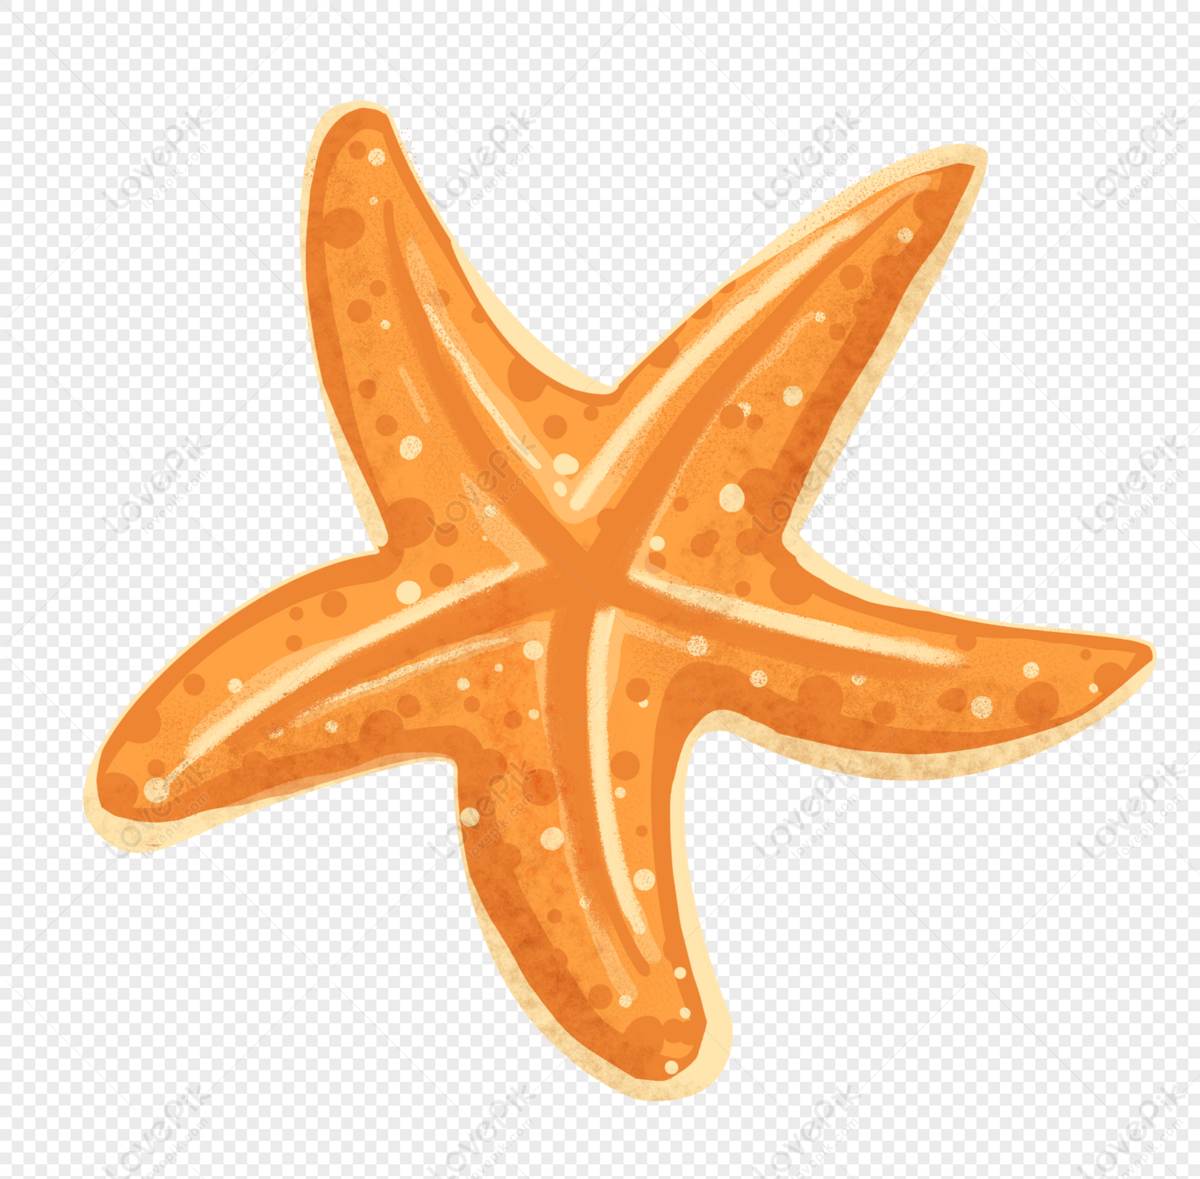 Cartoon Starfish PNG Image And Clipart Image For Free Download - Lovepik |  400252408